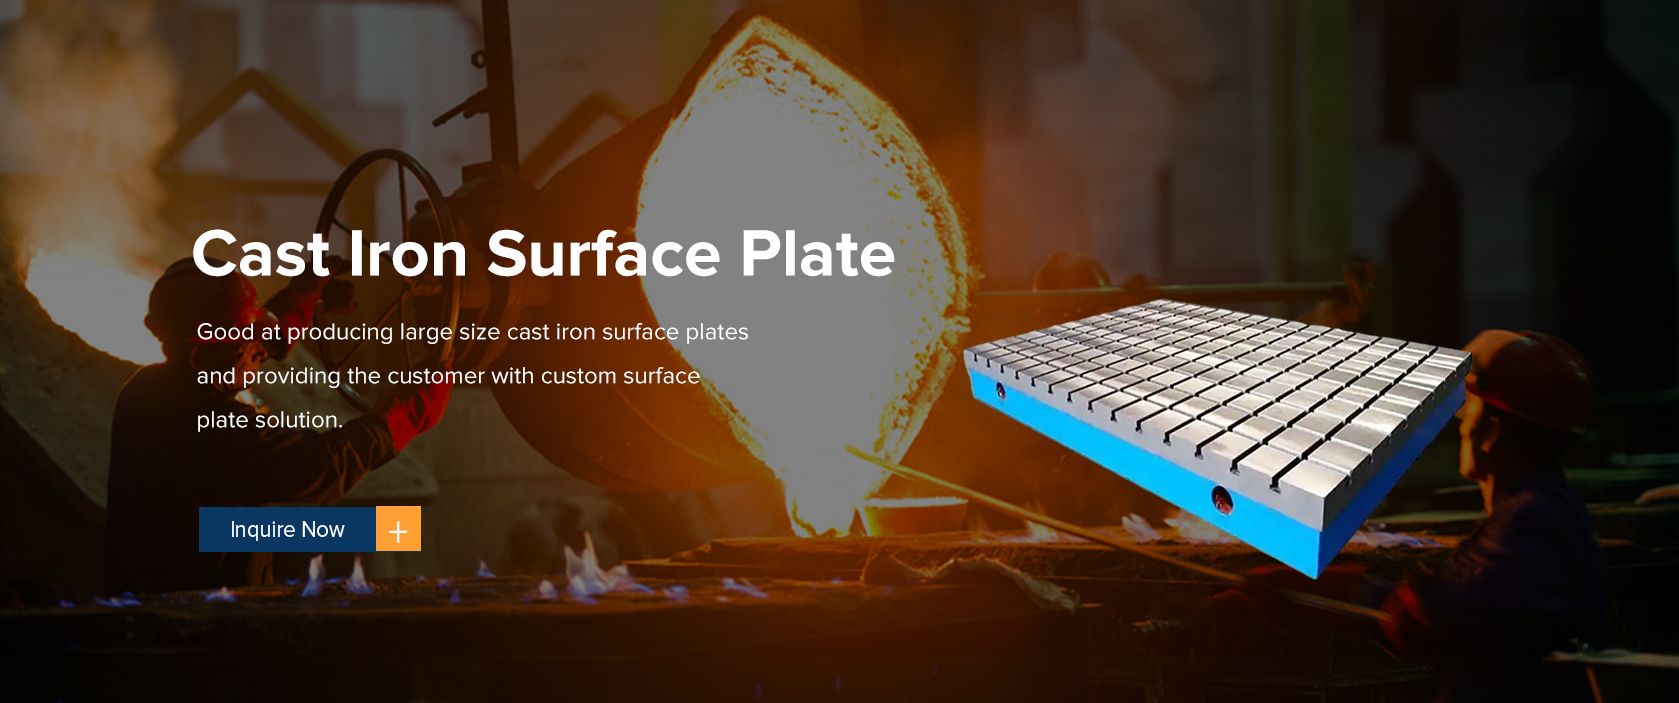 Good at producing large size cast iron surface plates and providing the customer with custom surface plate solution.